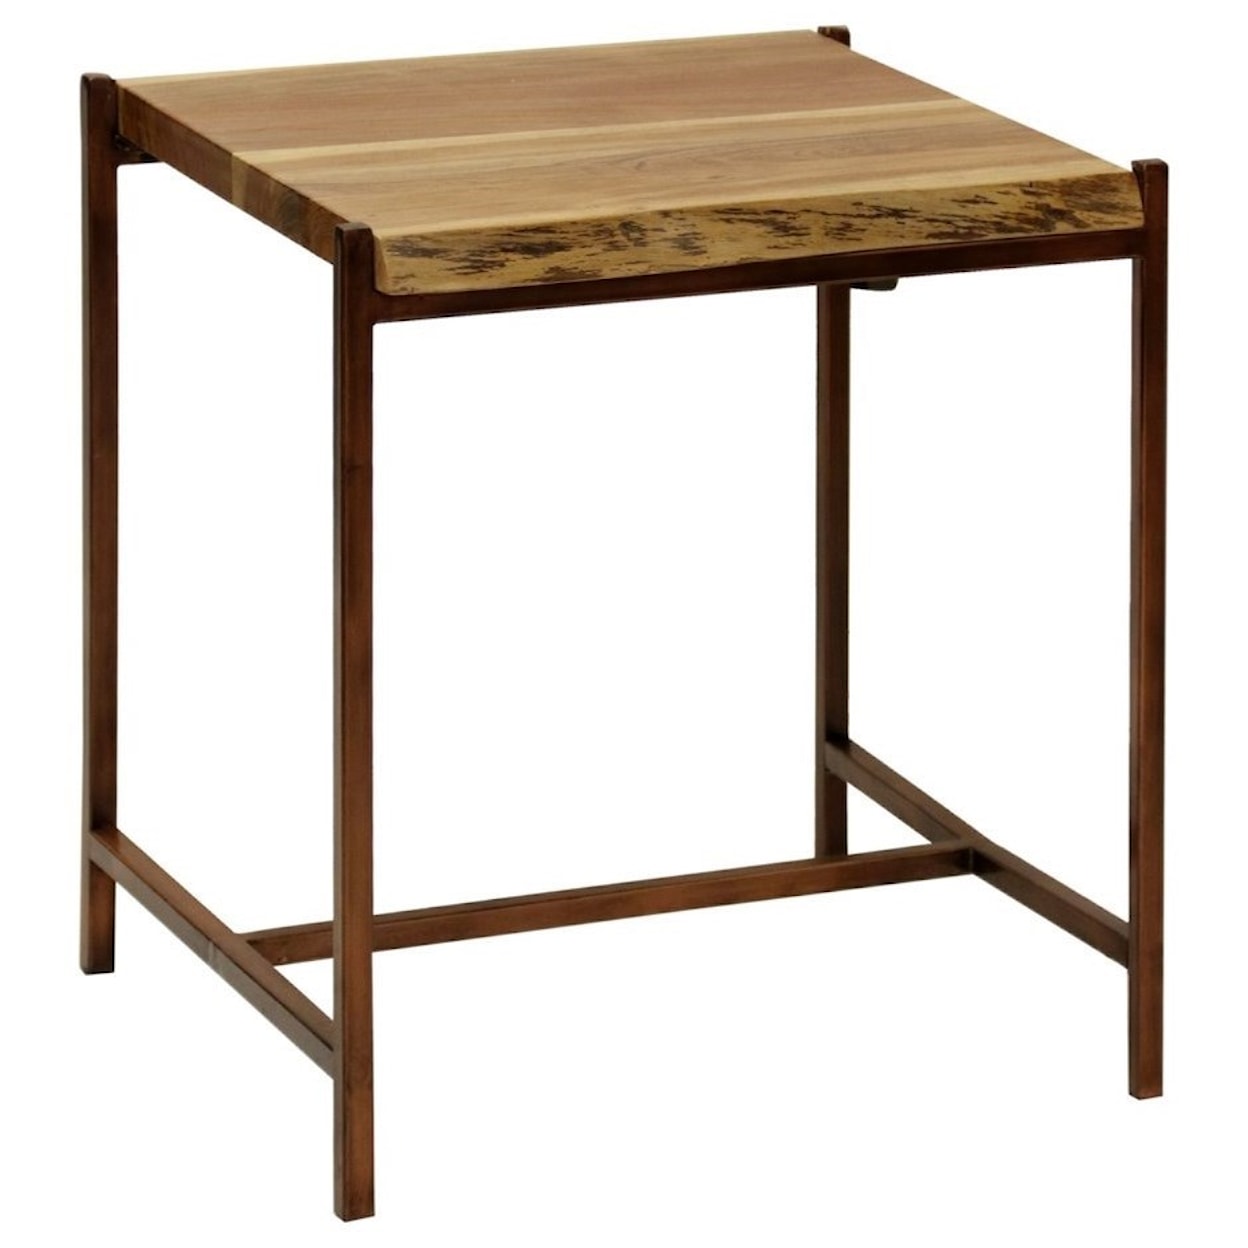 StyleCraft Occasional Tables Live Edge Accent Wood Table